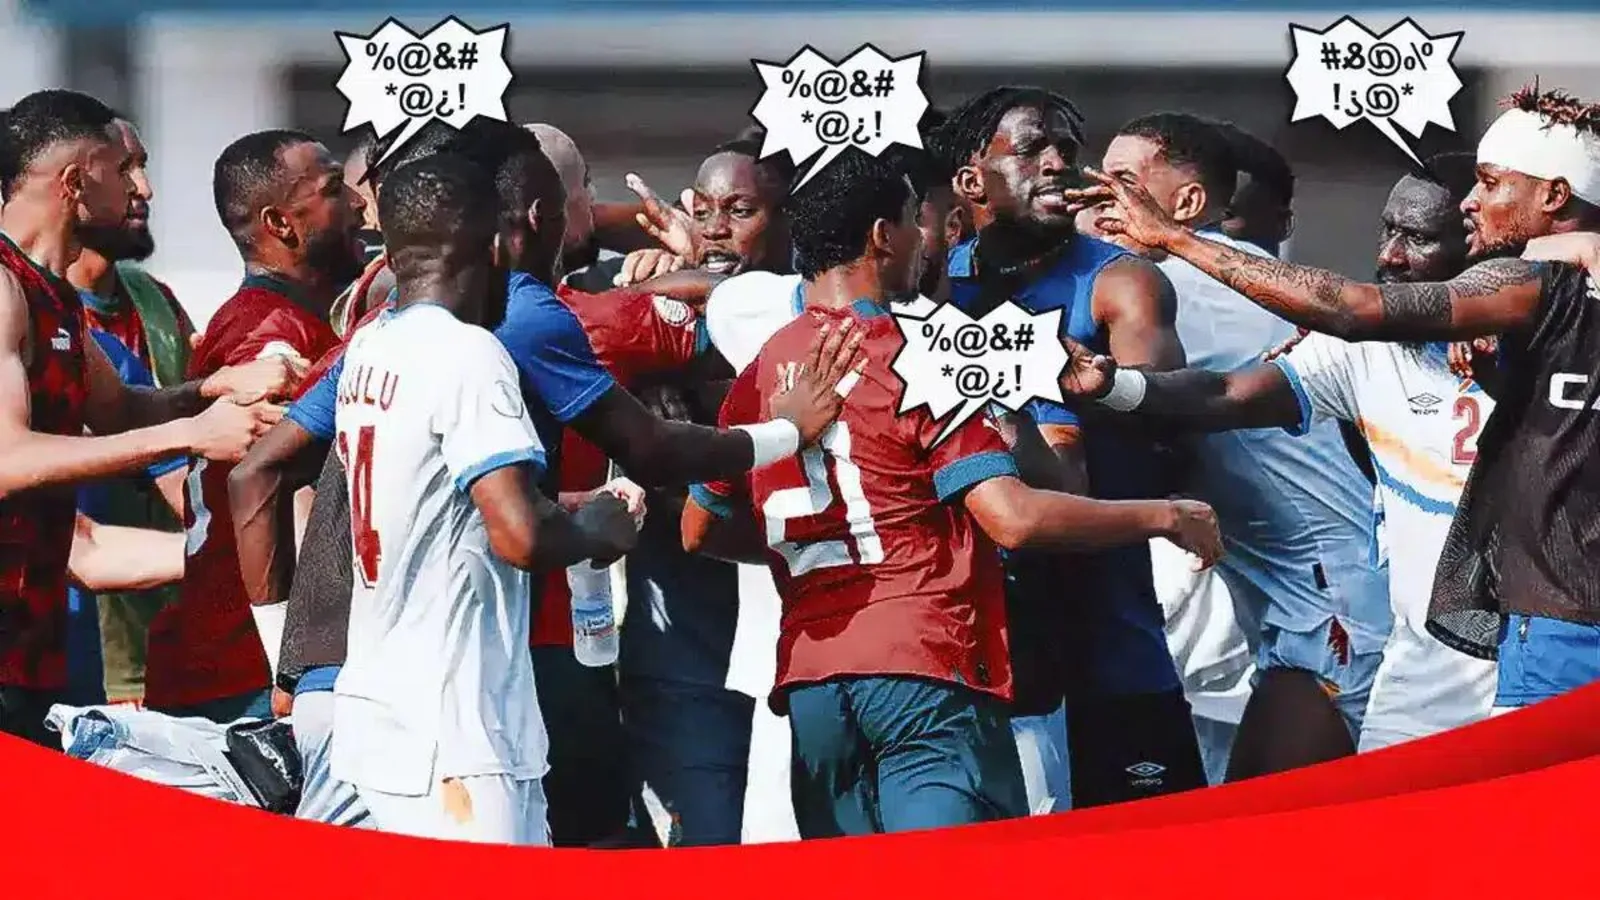 AFCON chaos as Morrocon star gets racially abused after chasing his opponent